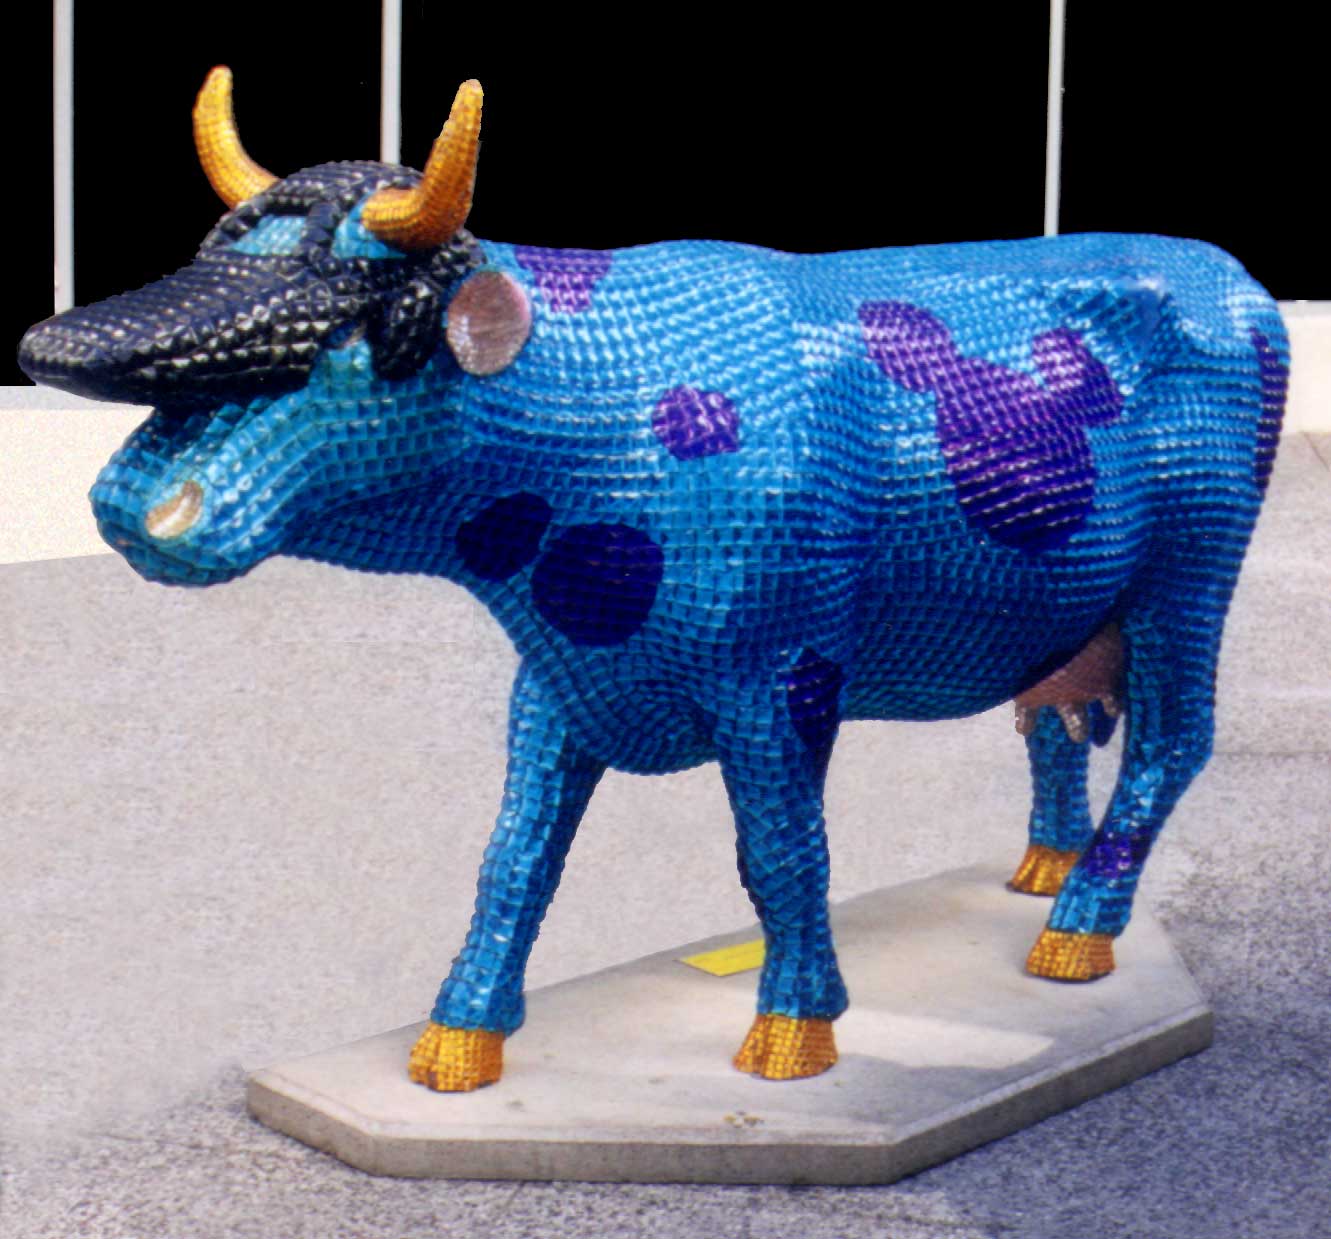 disneyquest mosaic for Cows on Parade, chicago